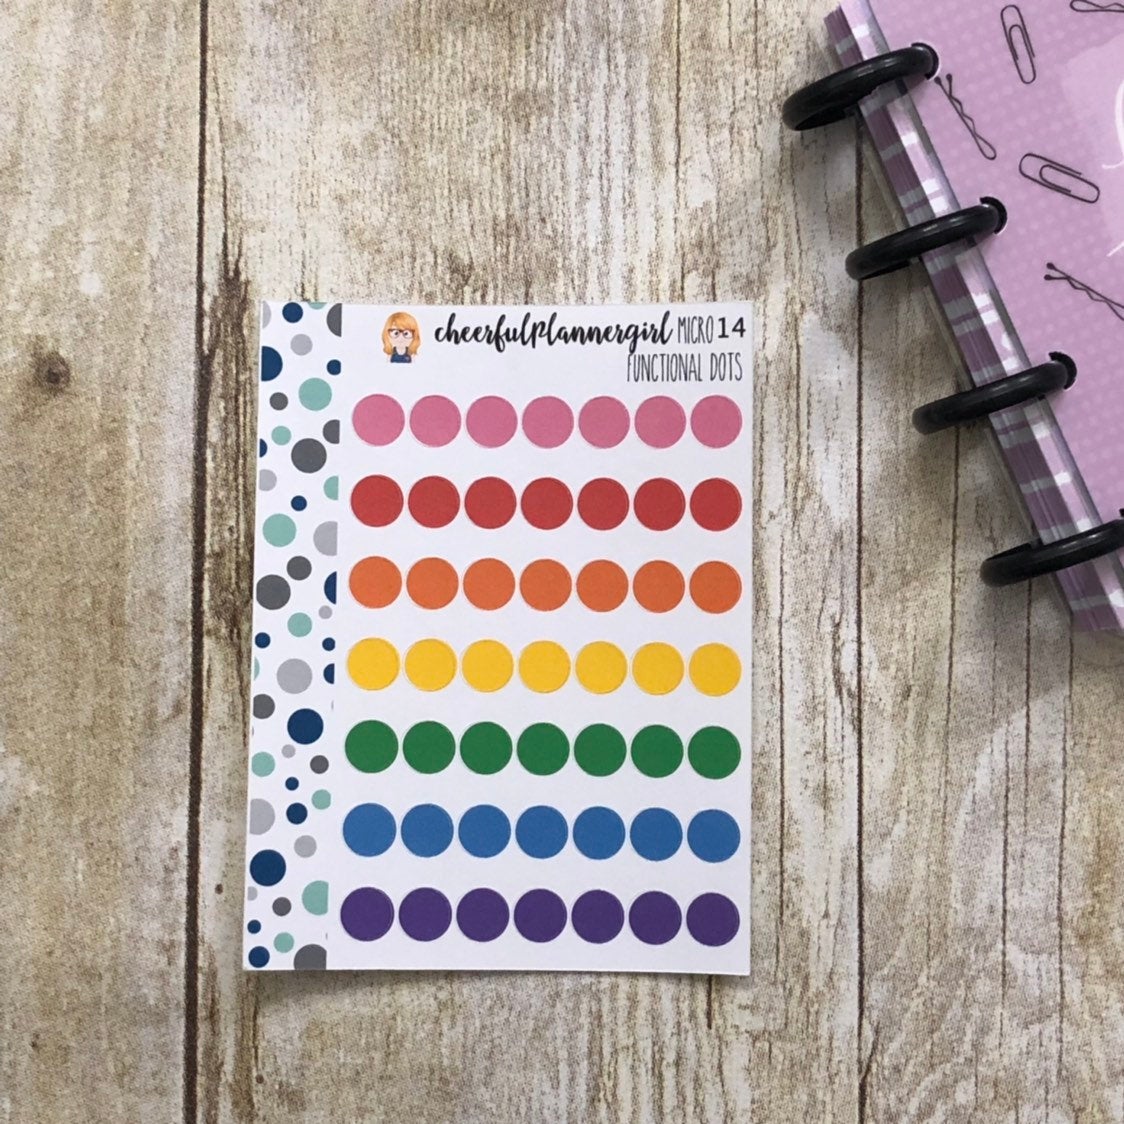 Rainbow Functional Dots Planner Stickers